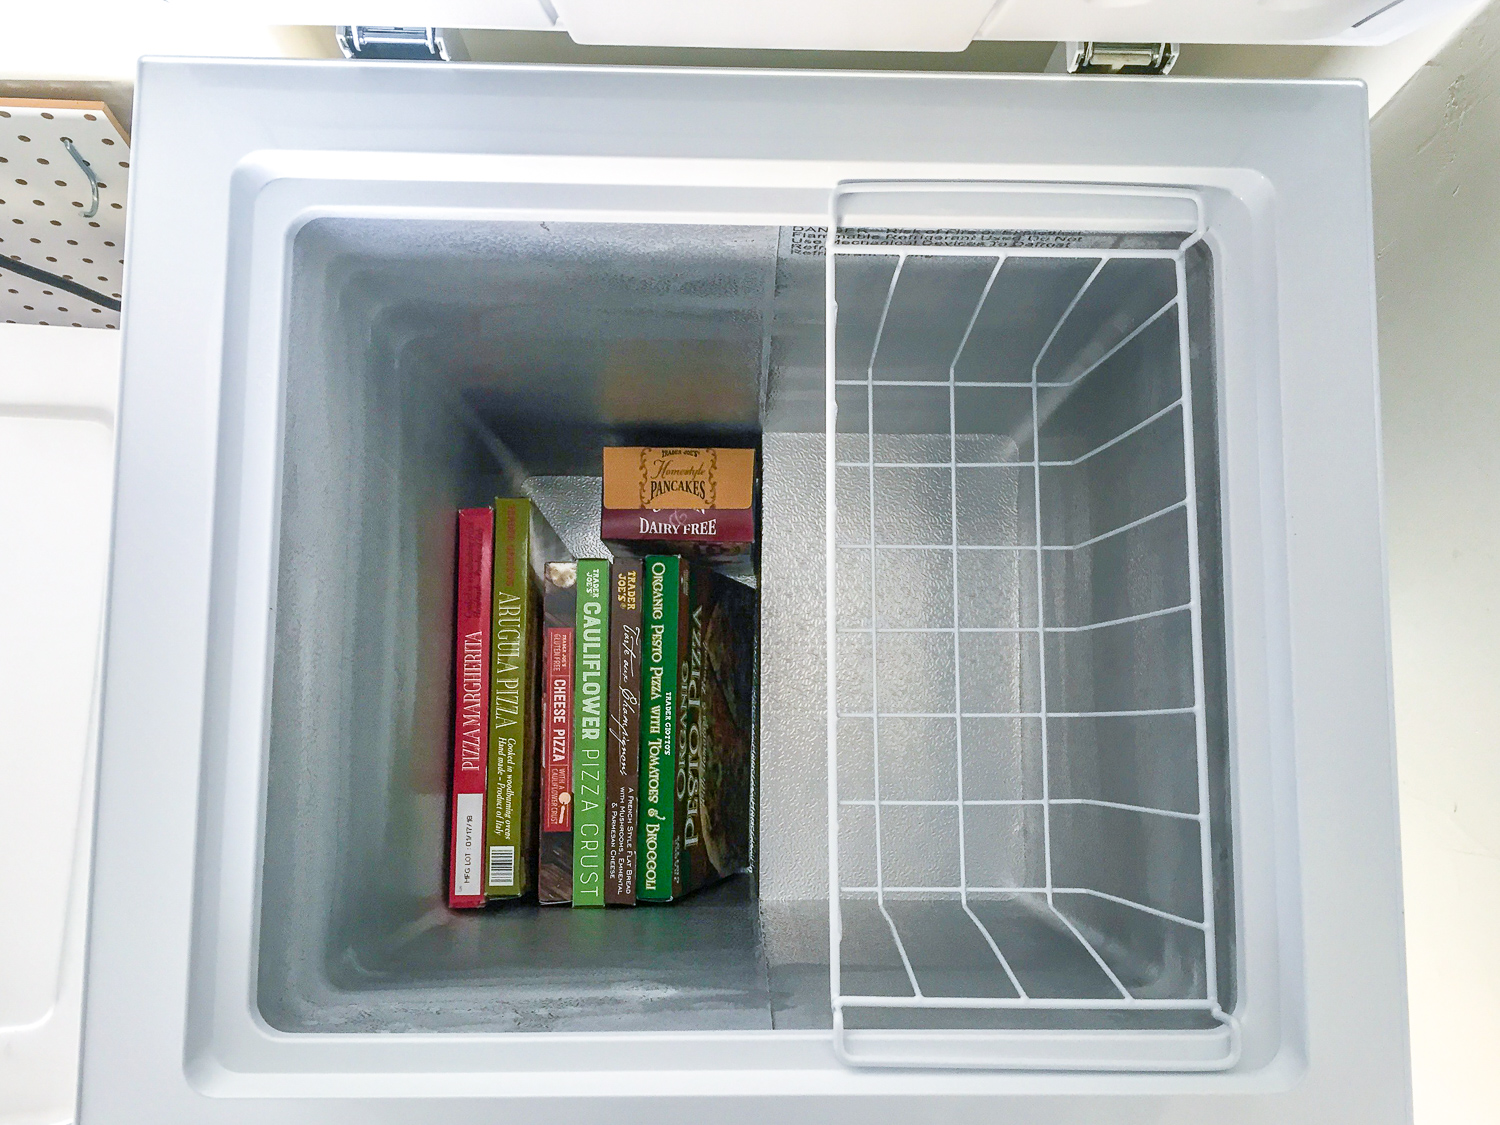 Top view of open inside of Insignia 3.5 Cu. Ft. Chest Freezer filled with Trader Joe's frozen pizzas